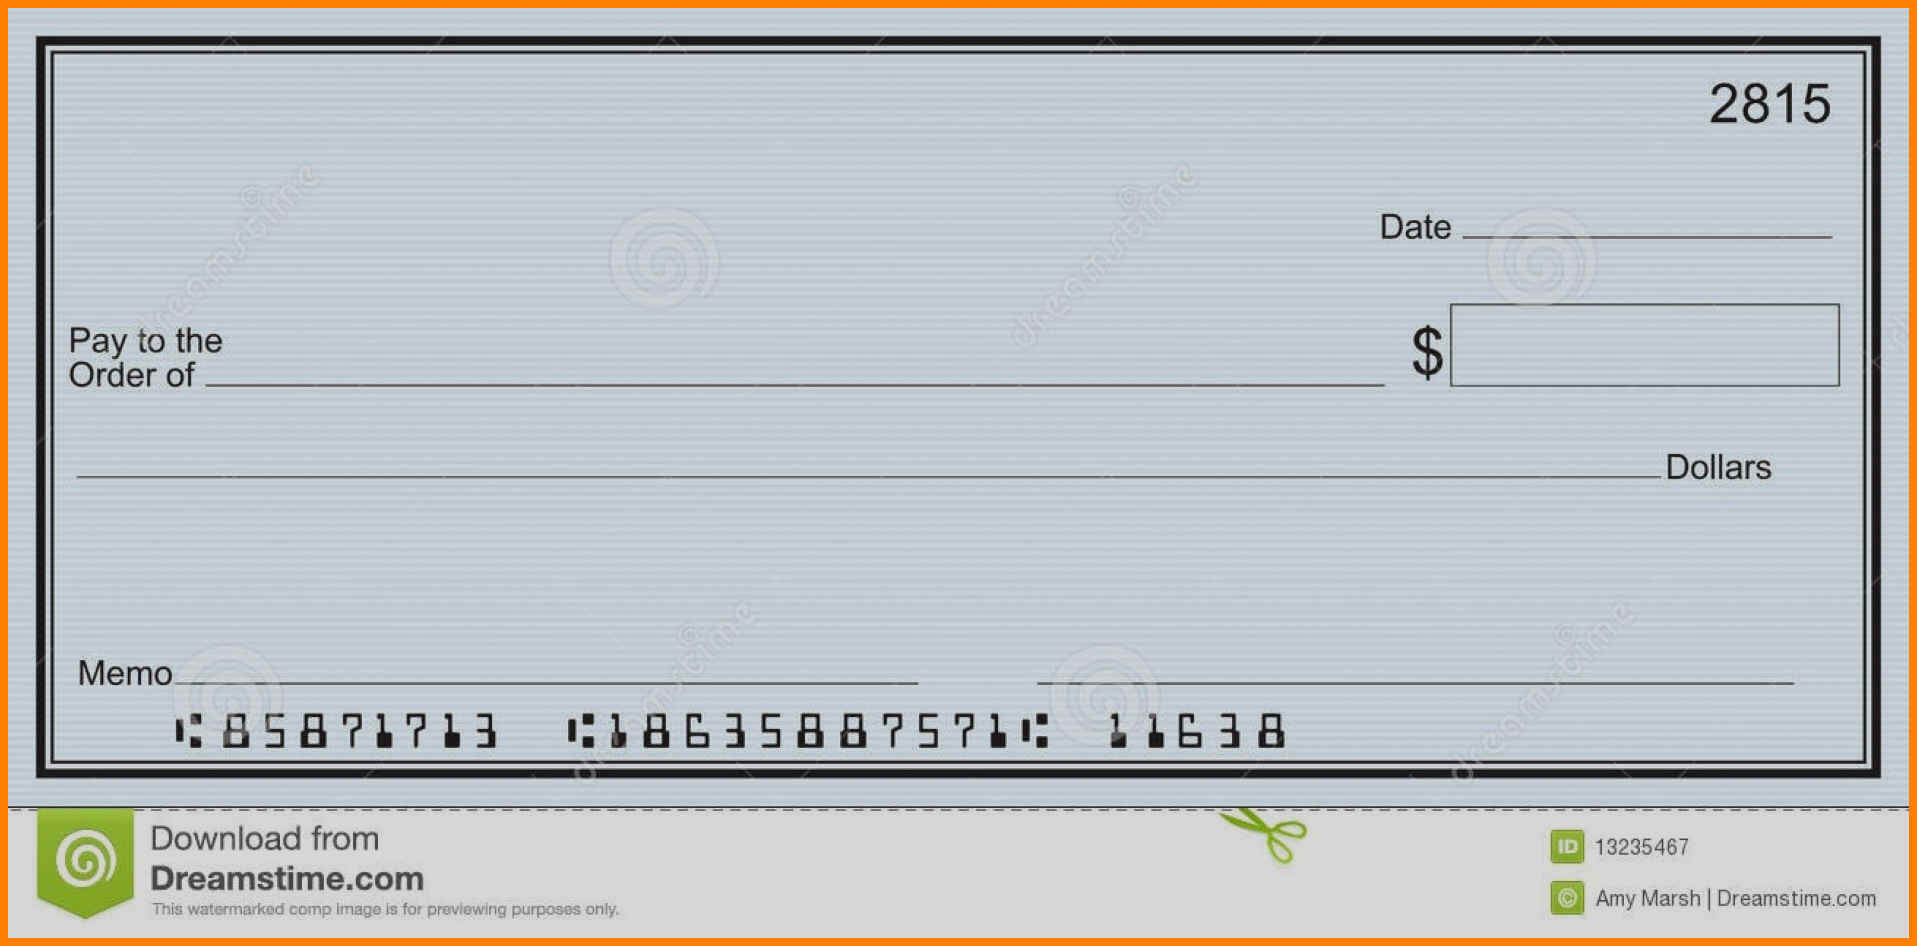 Fillable Blank Check Template - Free Download With Regard To Editable Blank Check Template